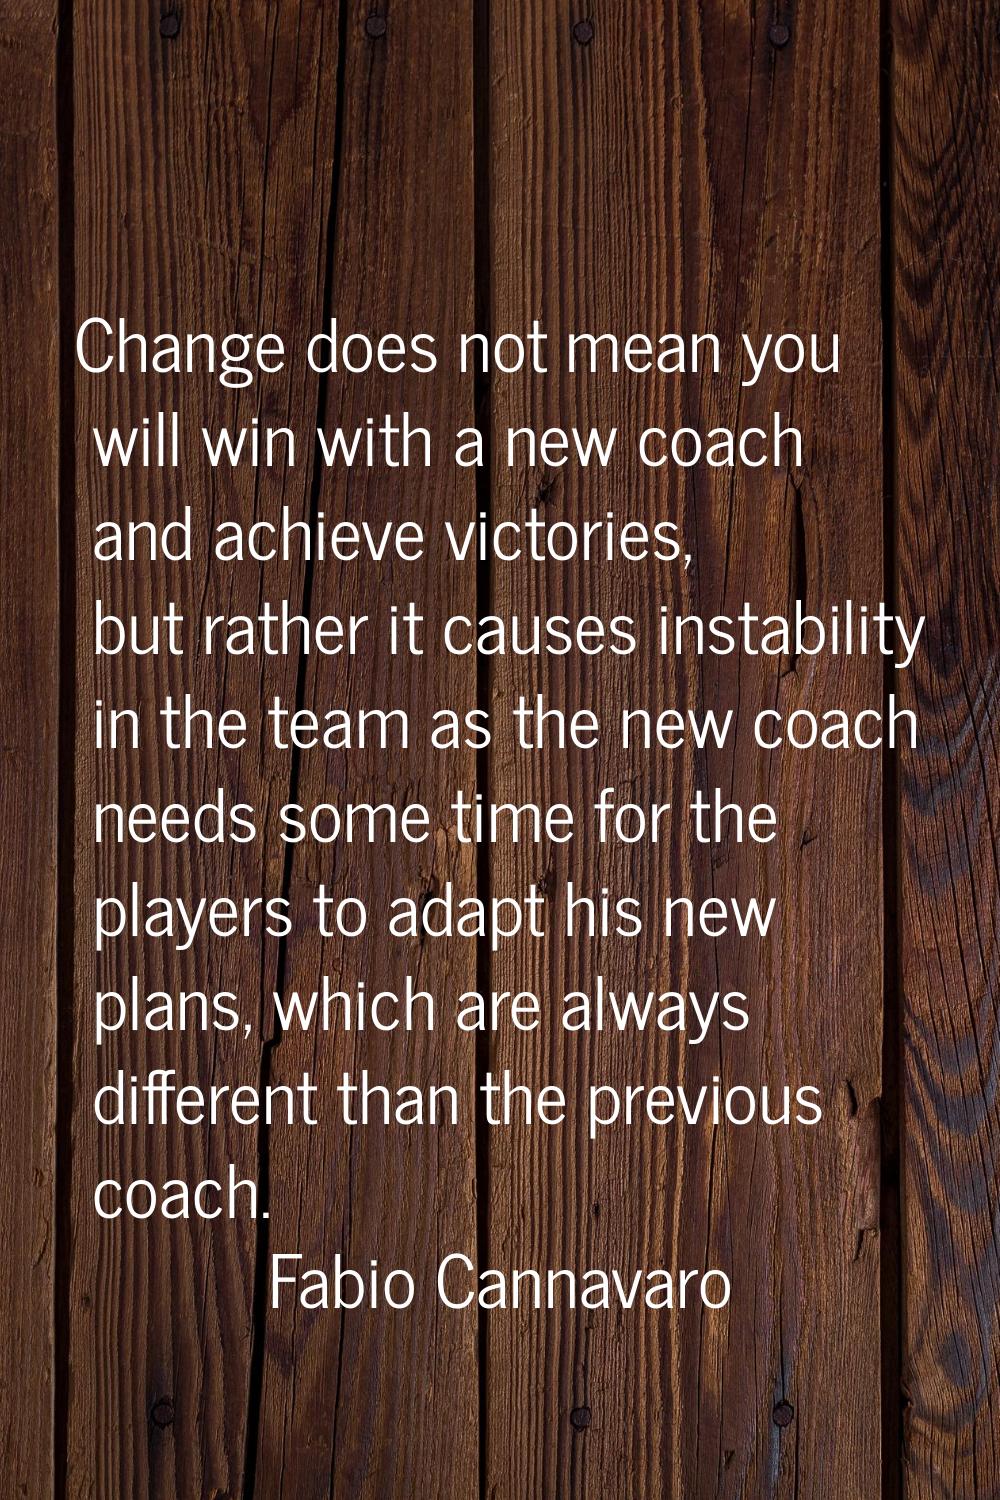 Change does not mean you will win with a new coach and achieve victories, but rather it causes inst